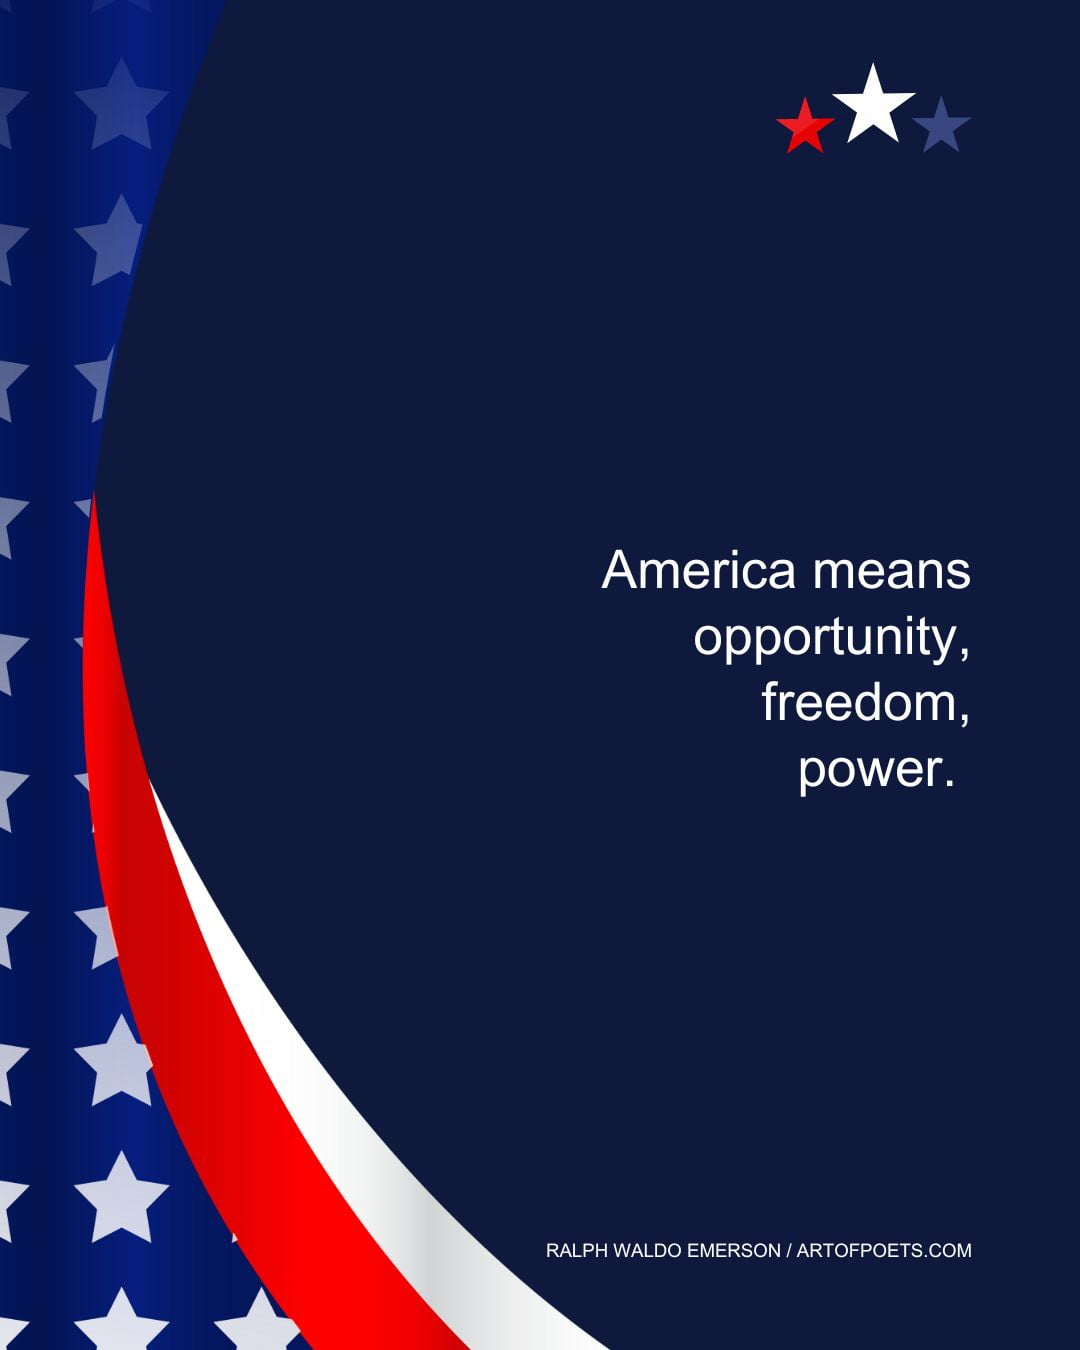 America means opportunity freedom power